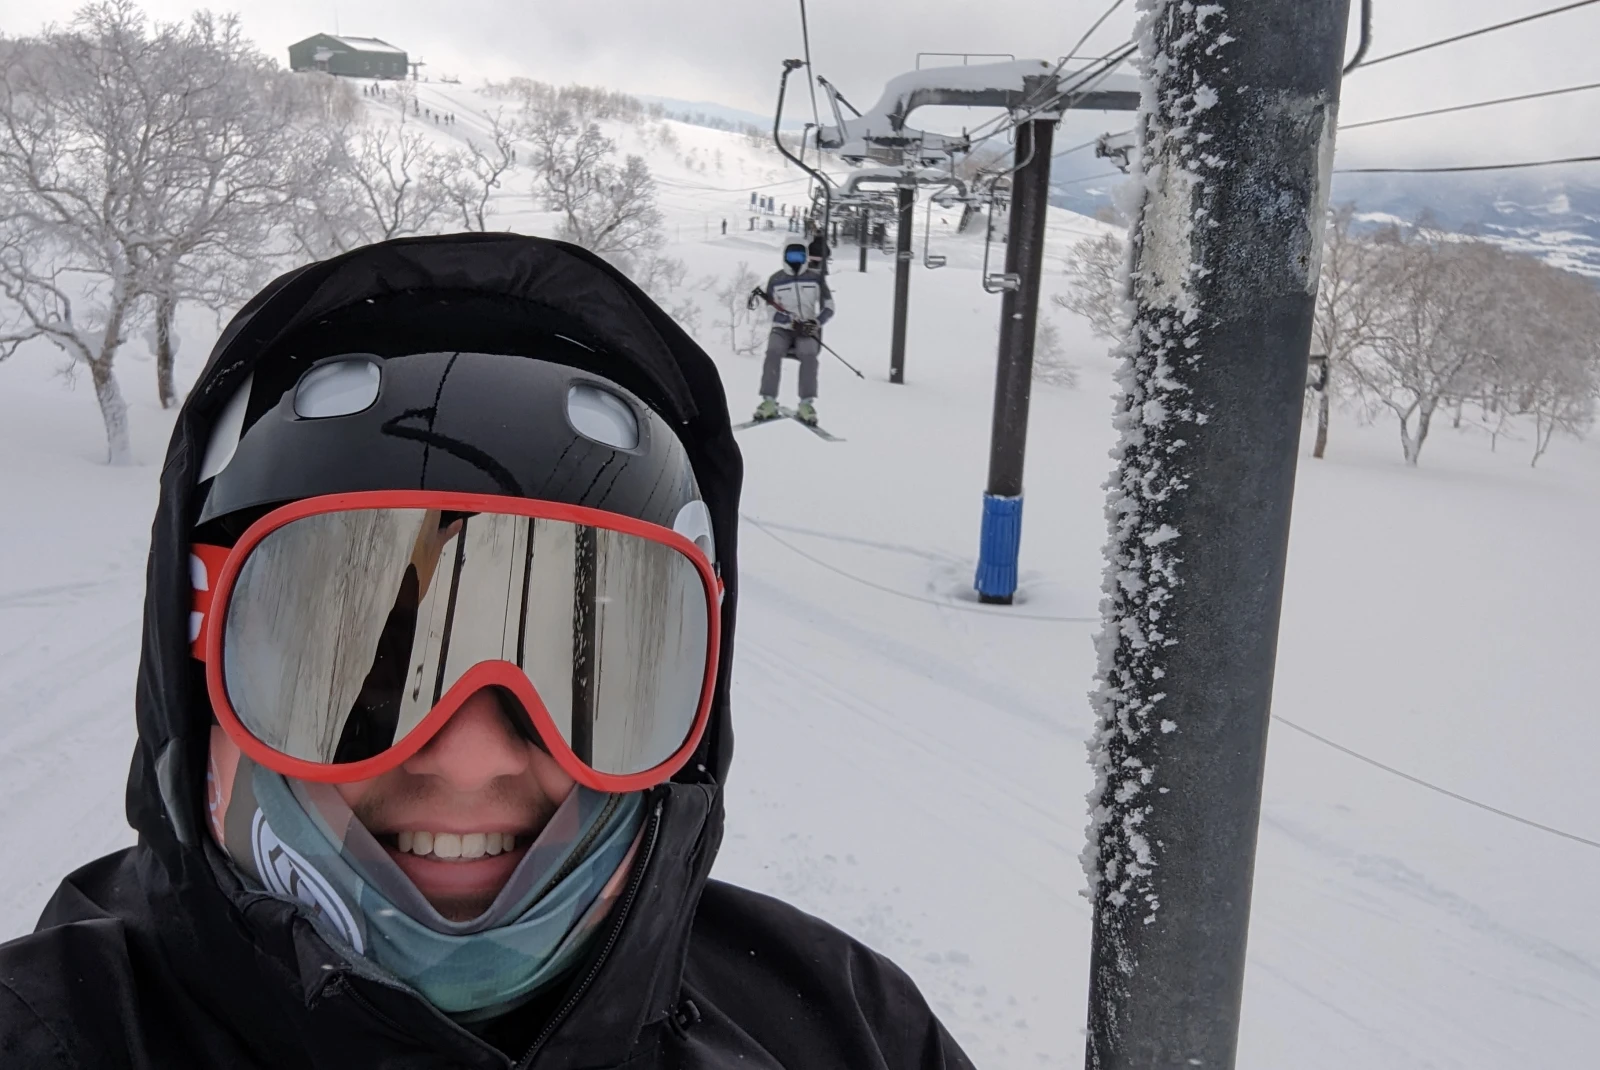 A person in snow mask on a ski lift.